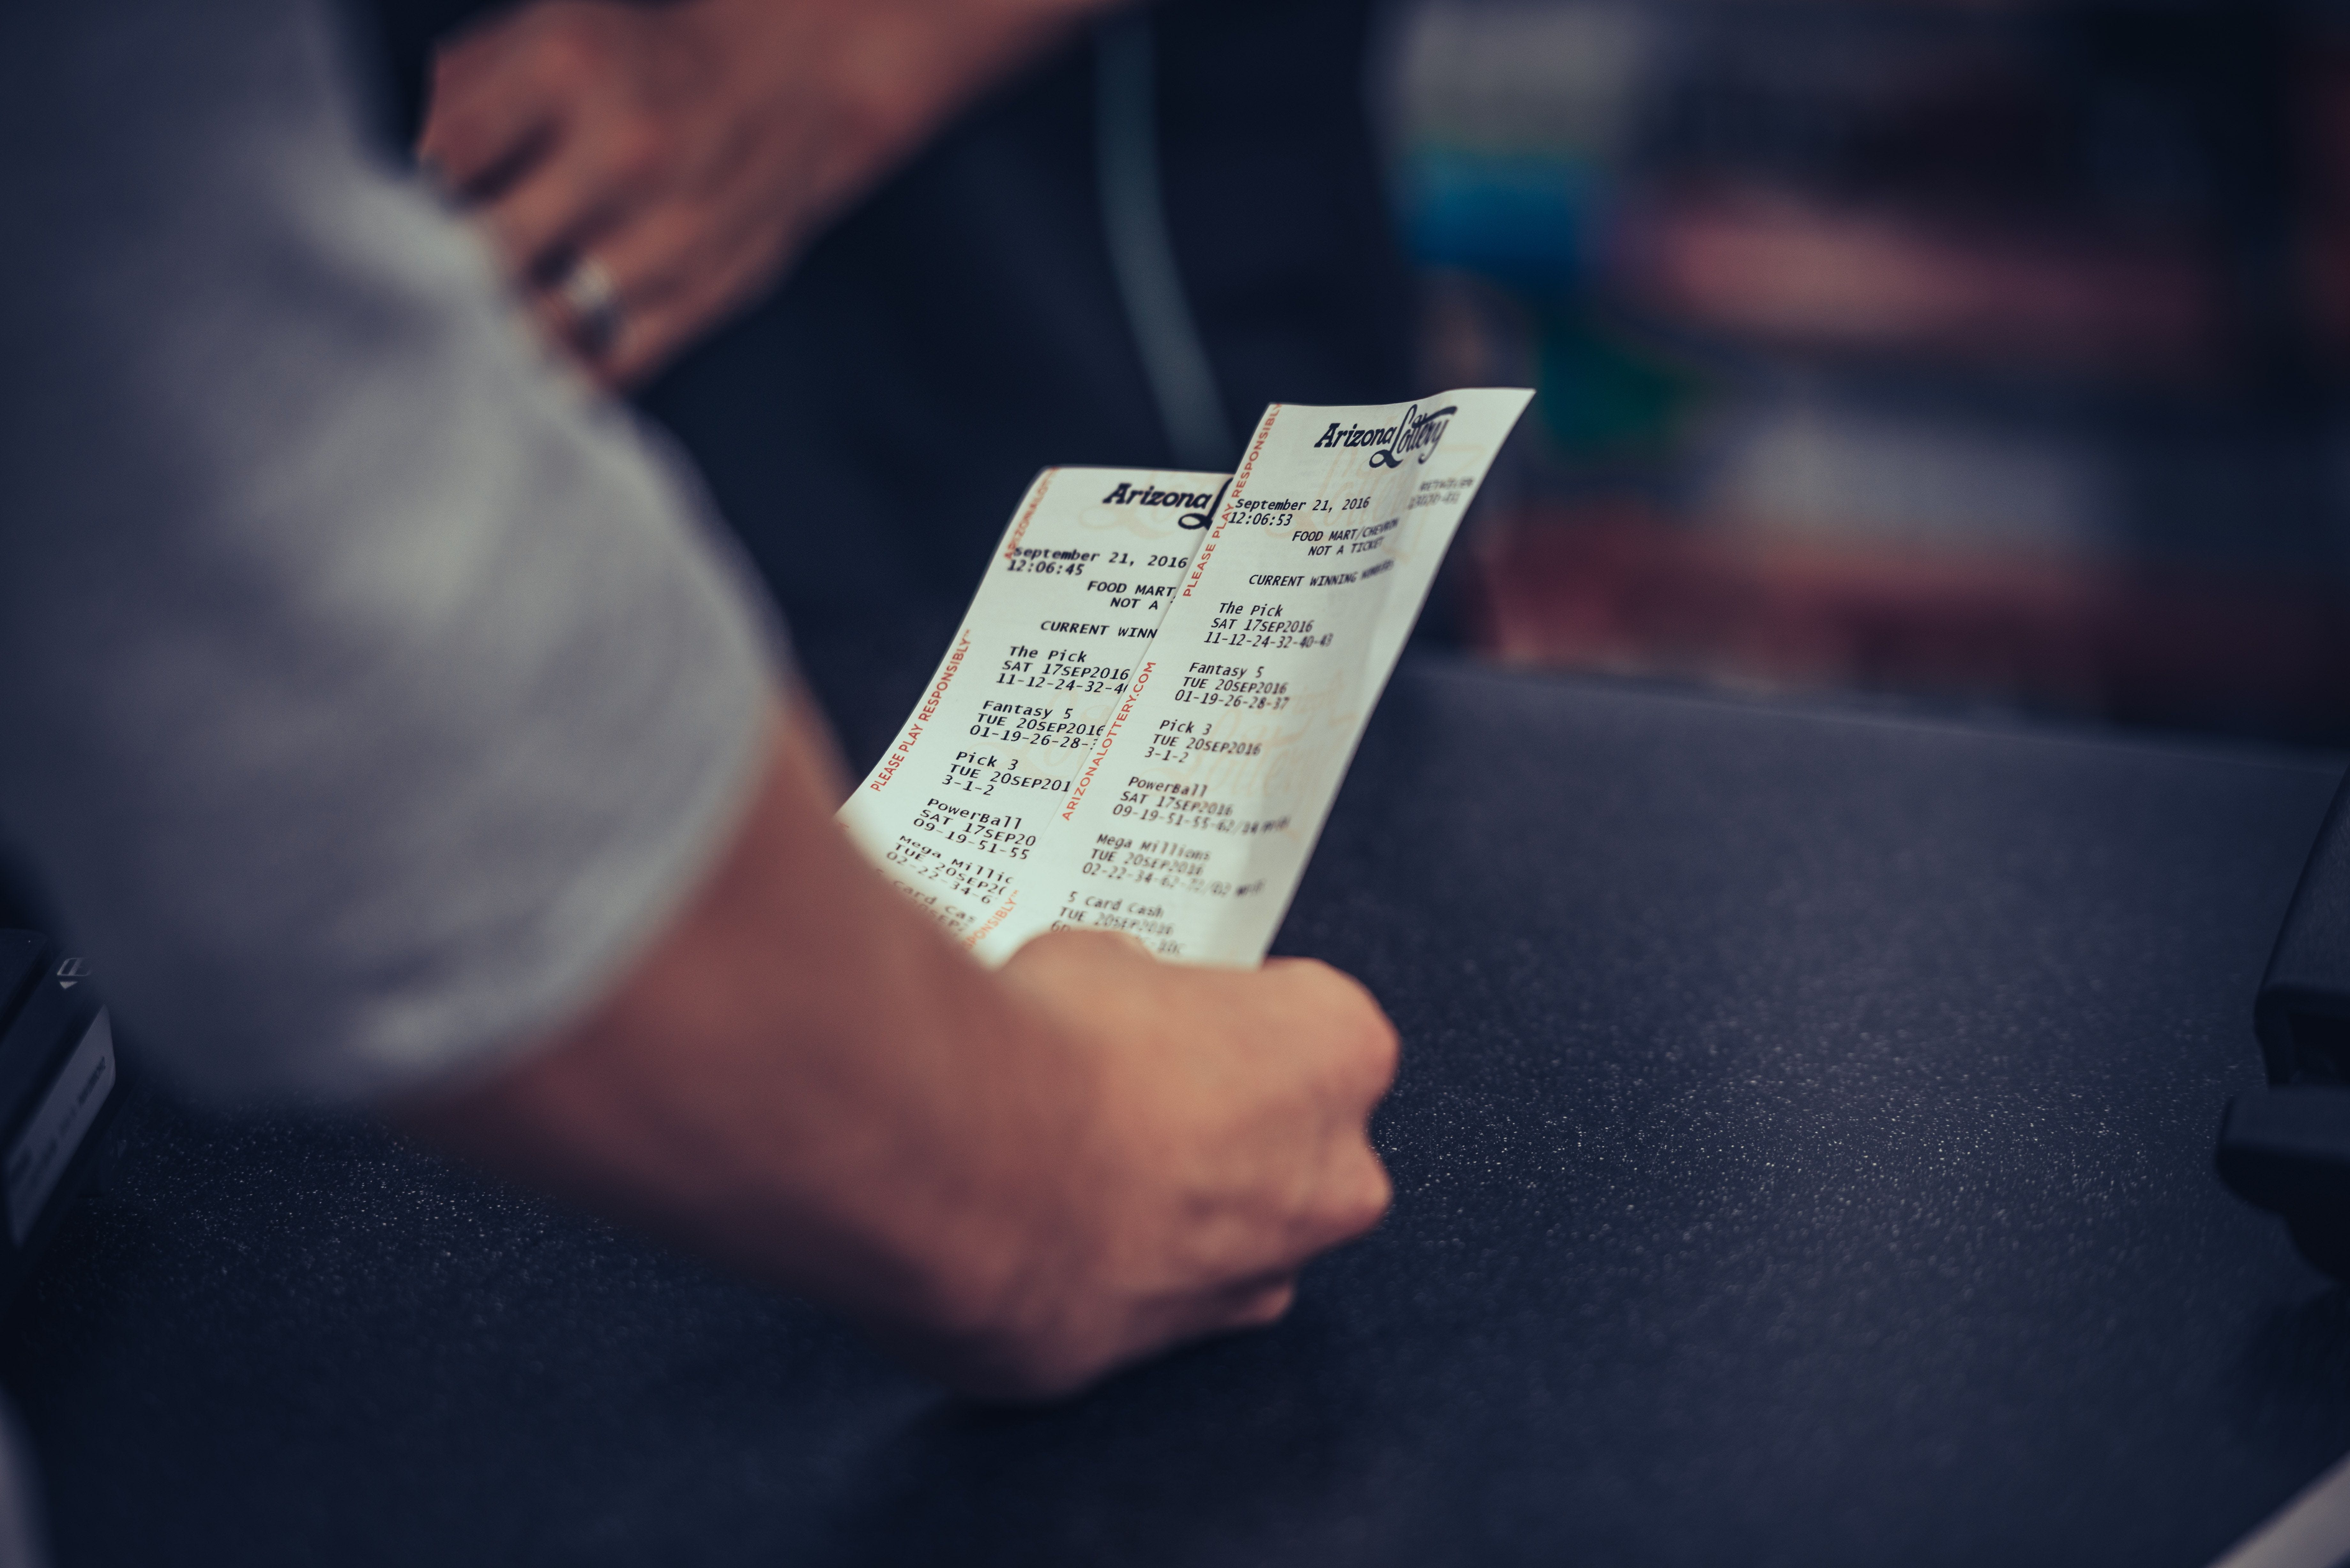 Over $200K from 8 unclaimed lottery tickets sold in Arizona; $1.5 billion drawing Tuesday